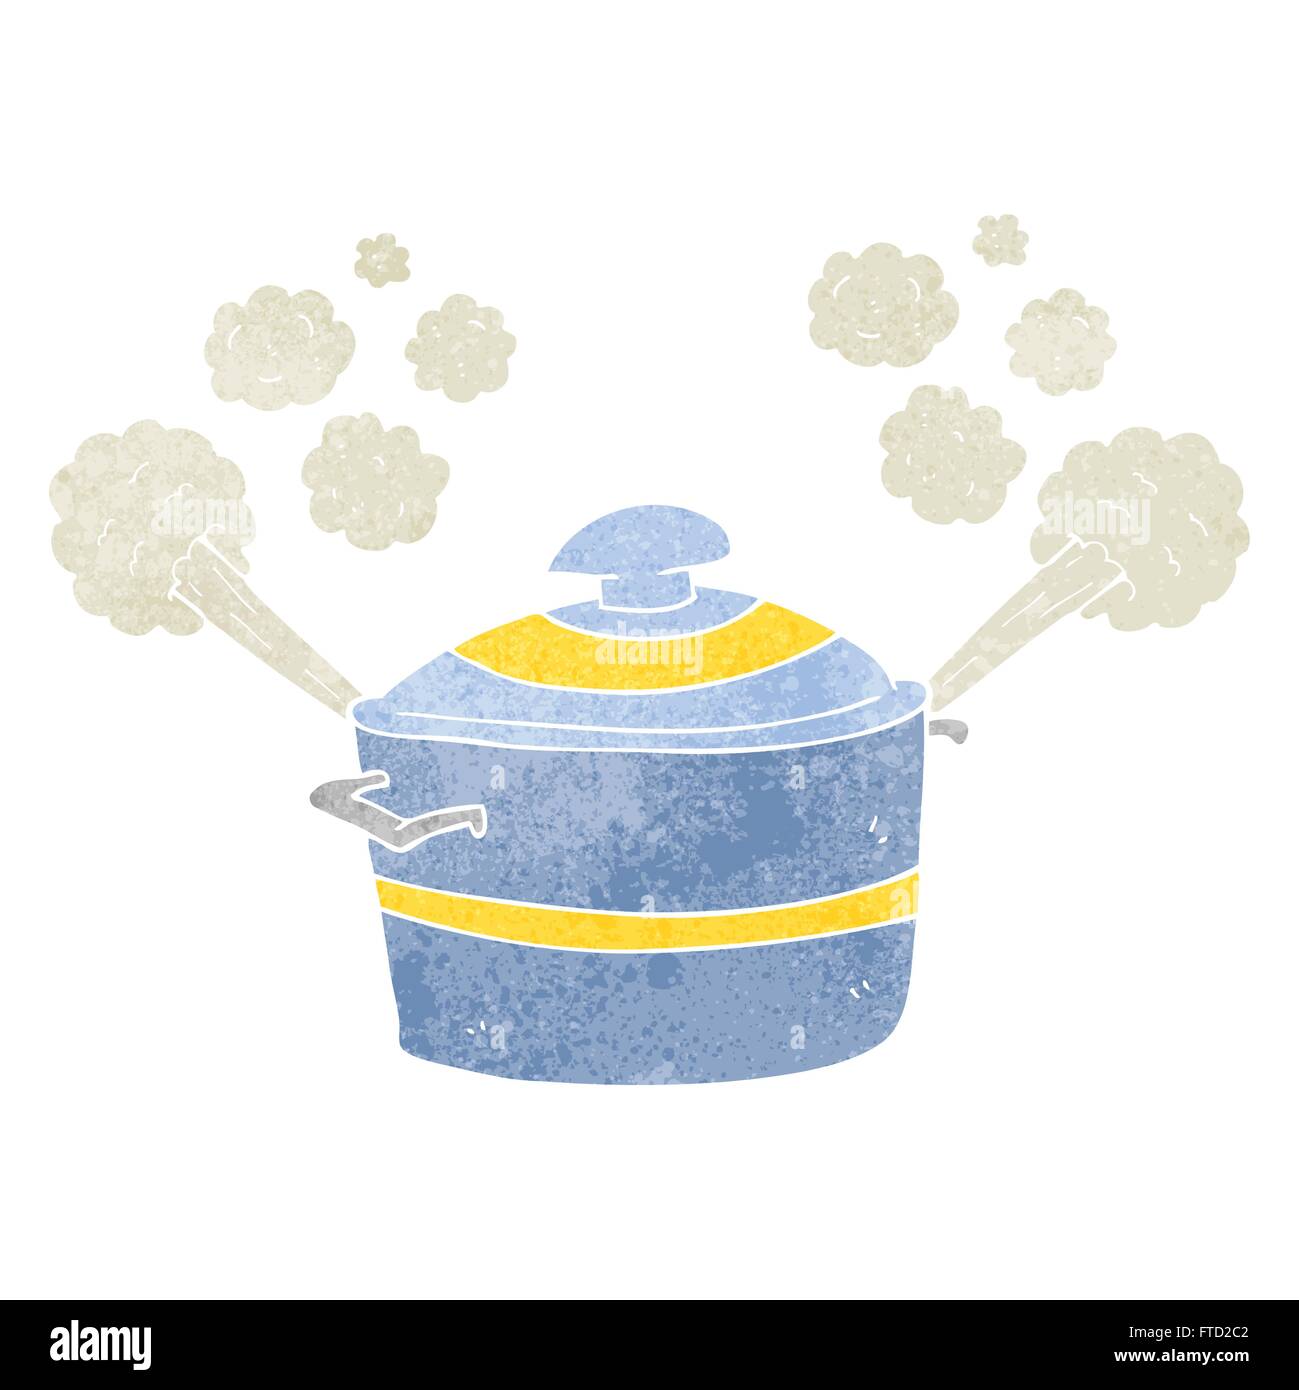 Freehand Drawn Black And White Cartoon Cooking Pot Royalty Free SVG,  Cliparts, Vectors, and Stock Illustration. Image 53192952.